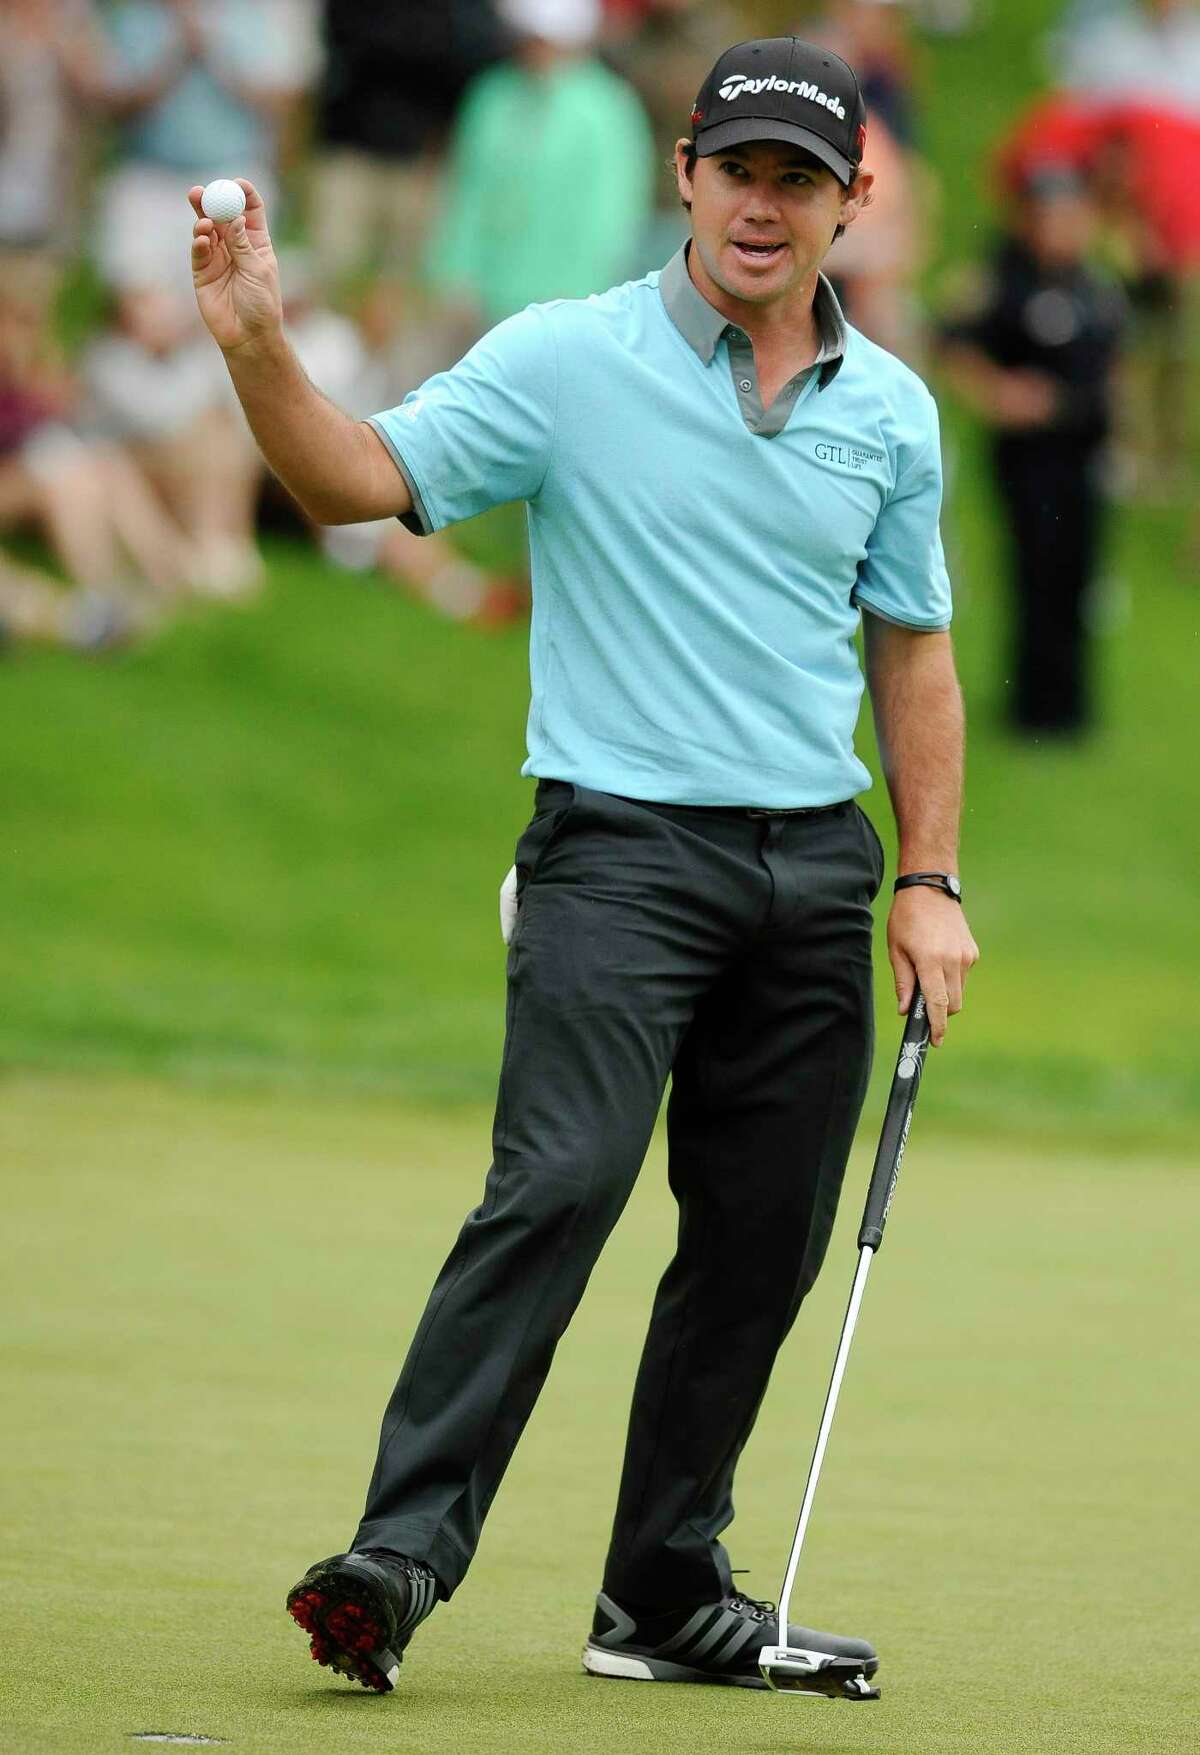 Brian Harman reacts after making a birdie on the 18th and taking the lead after three rounds of the Travelers Championship on Saturday in Cromwell.